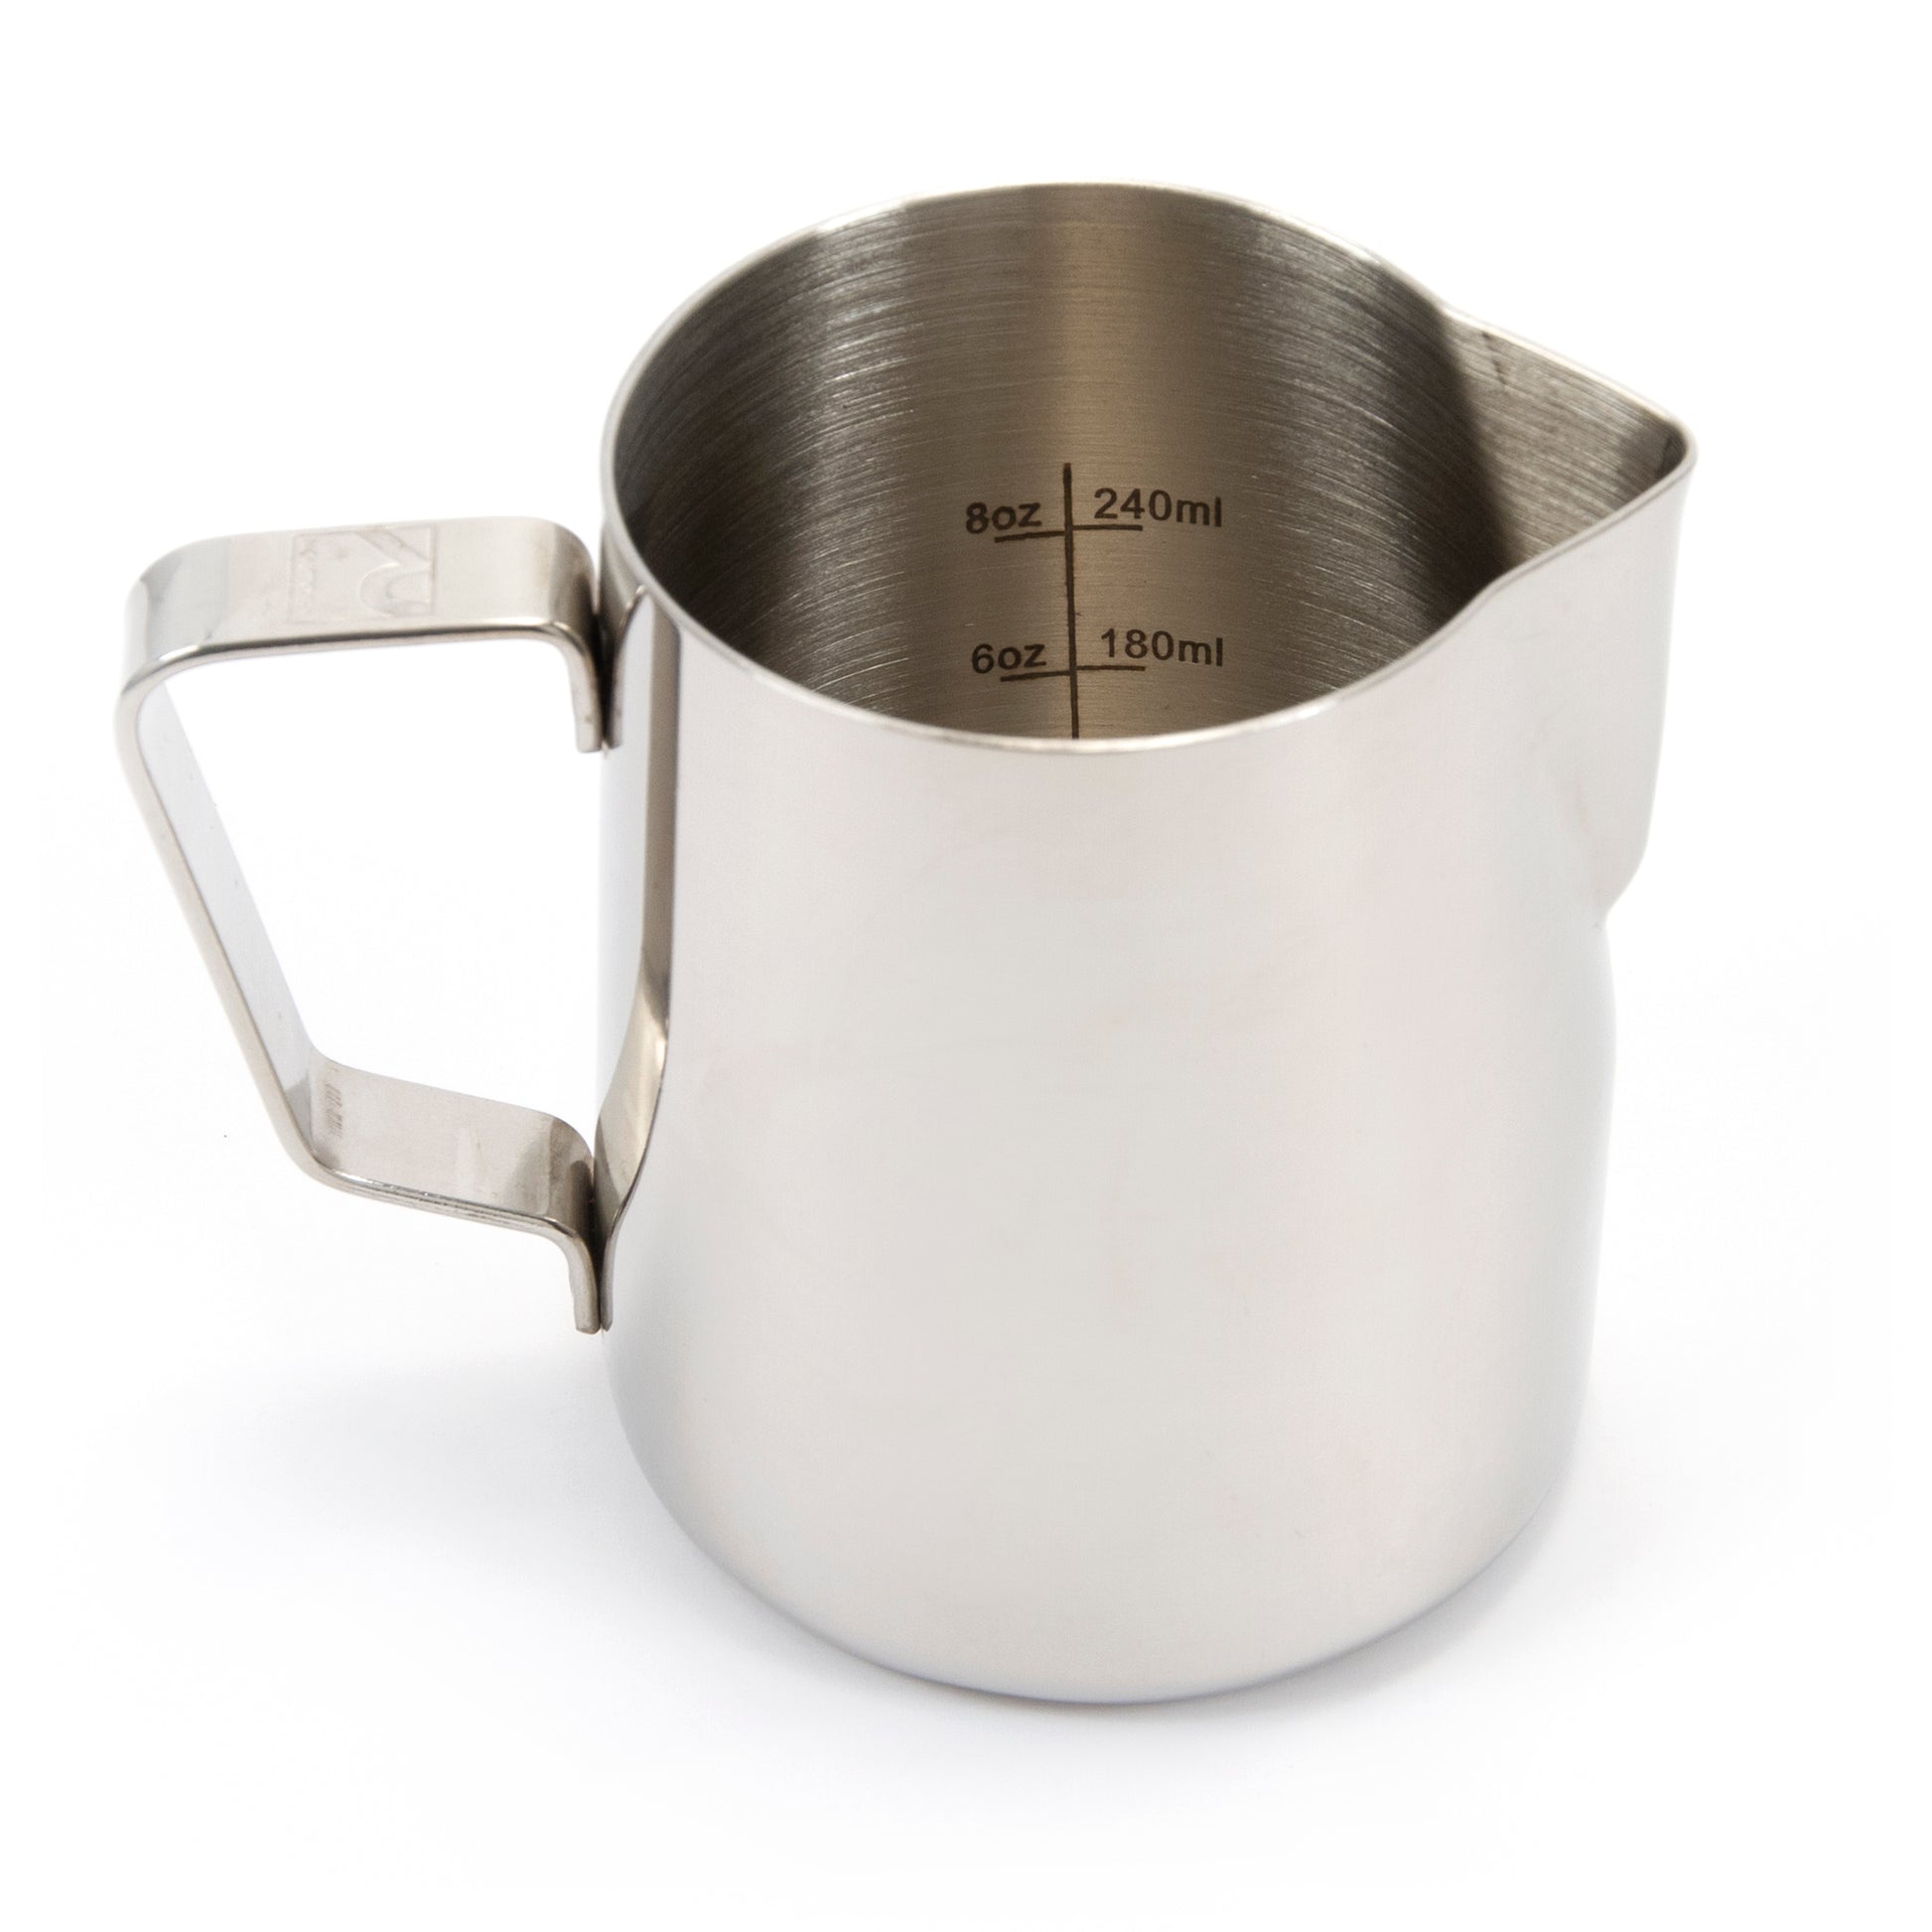 C.A.C. BVFP-48, 48 Oz 18/8 Stainless Steel Frothing Pitcher